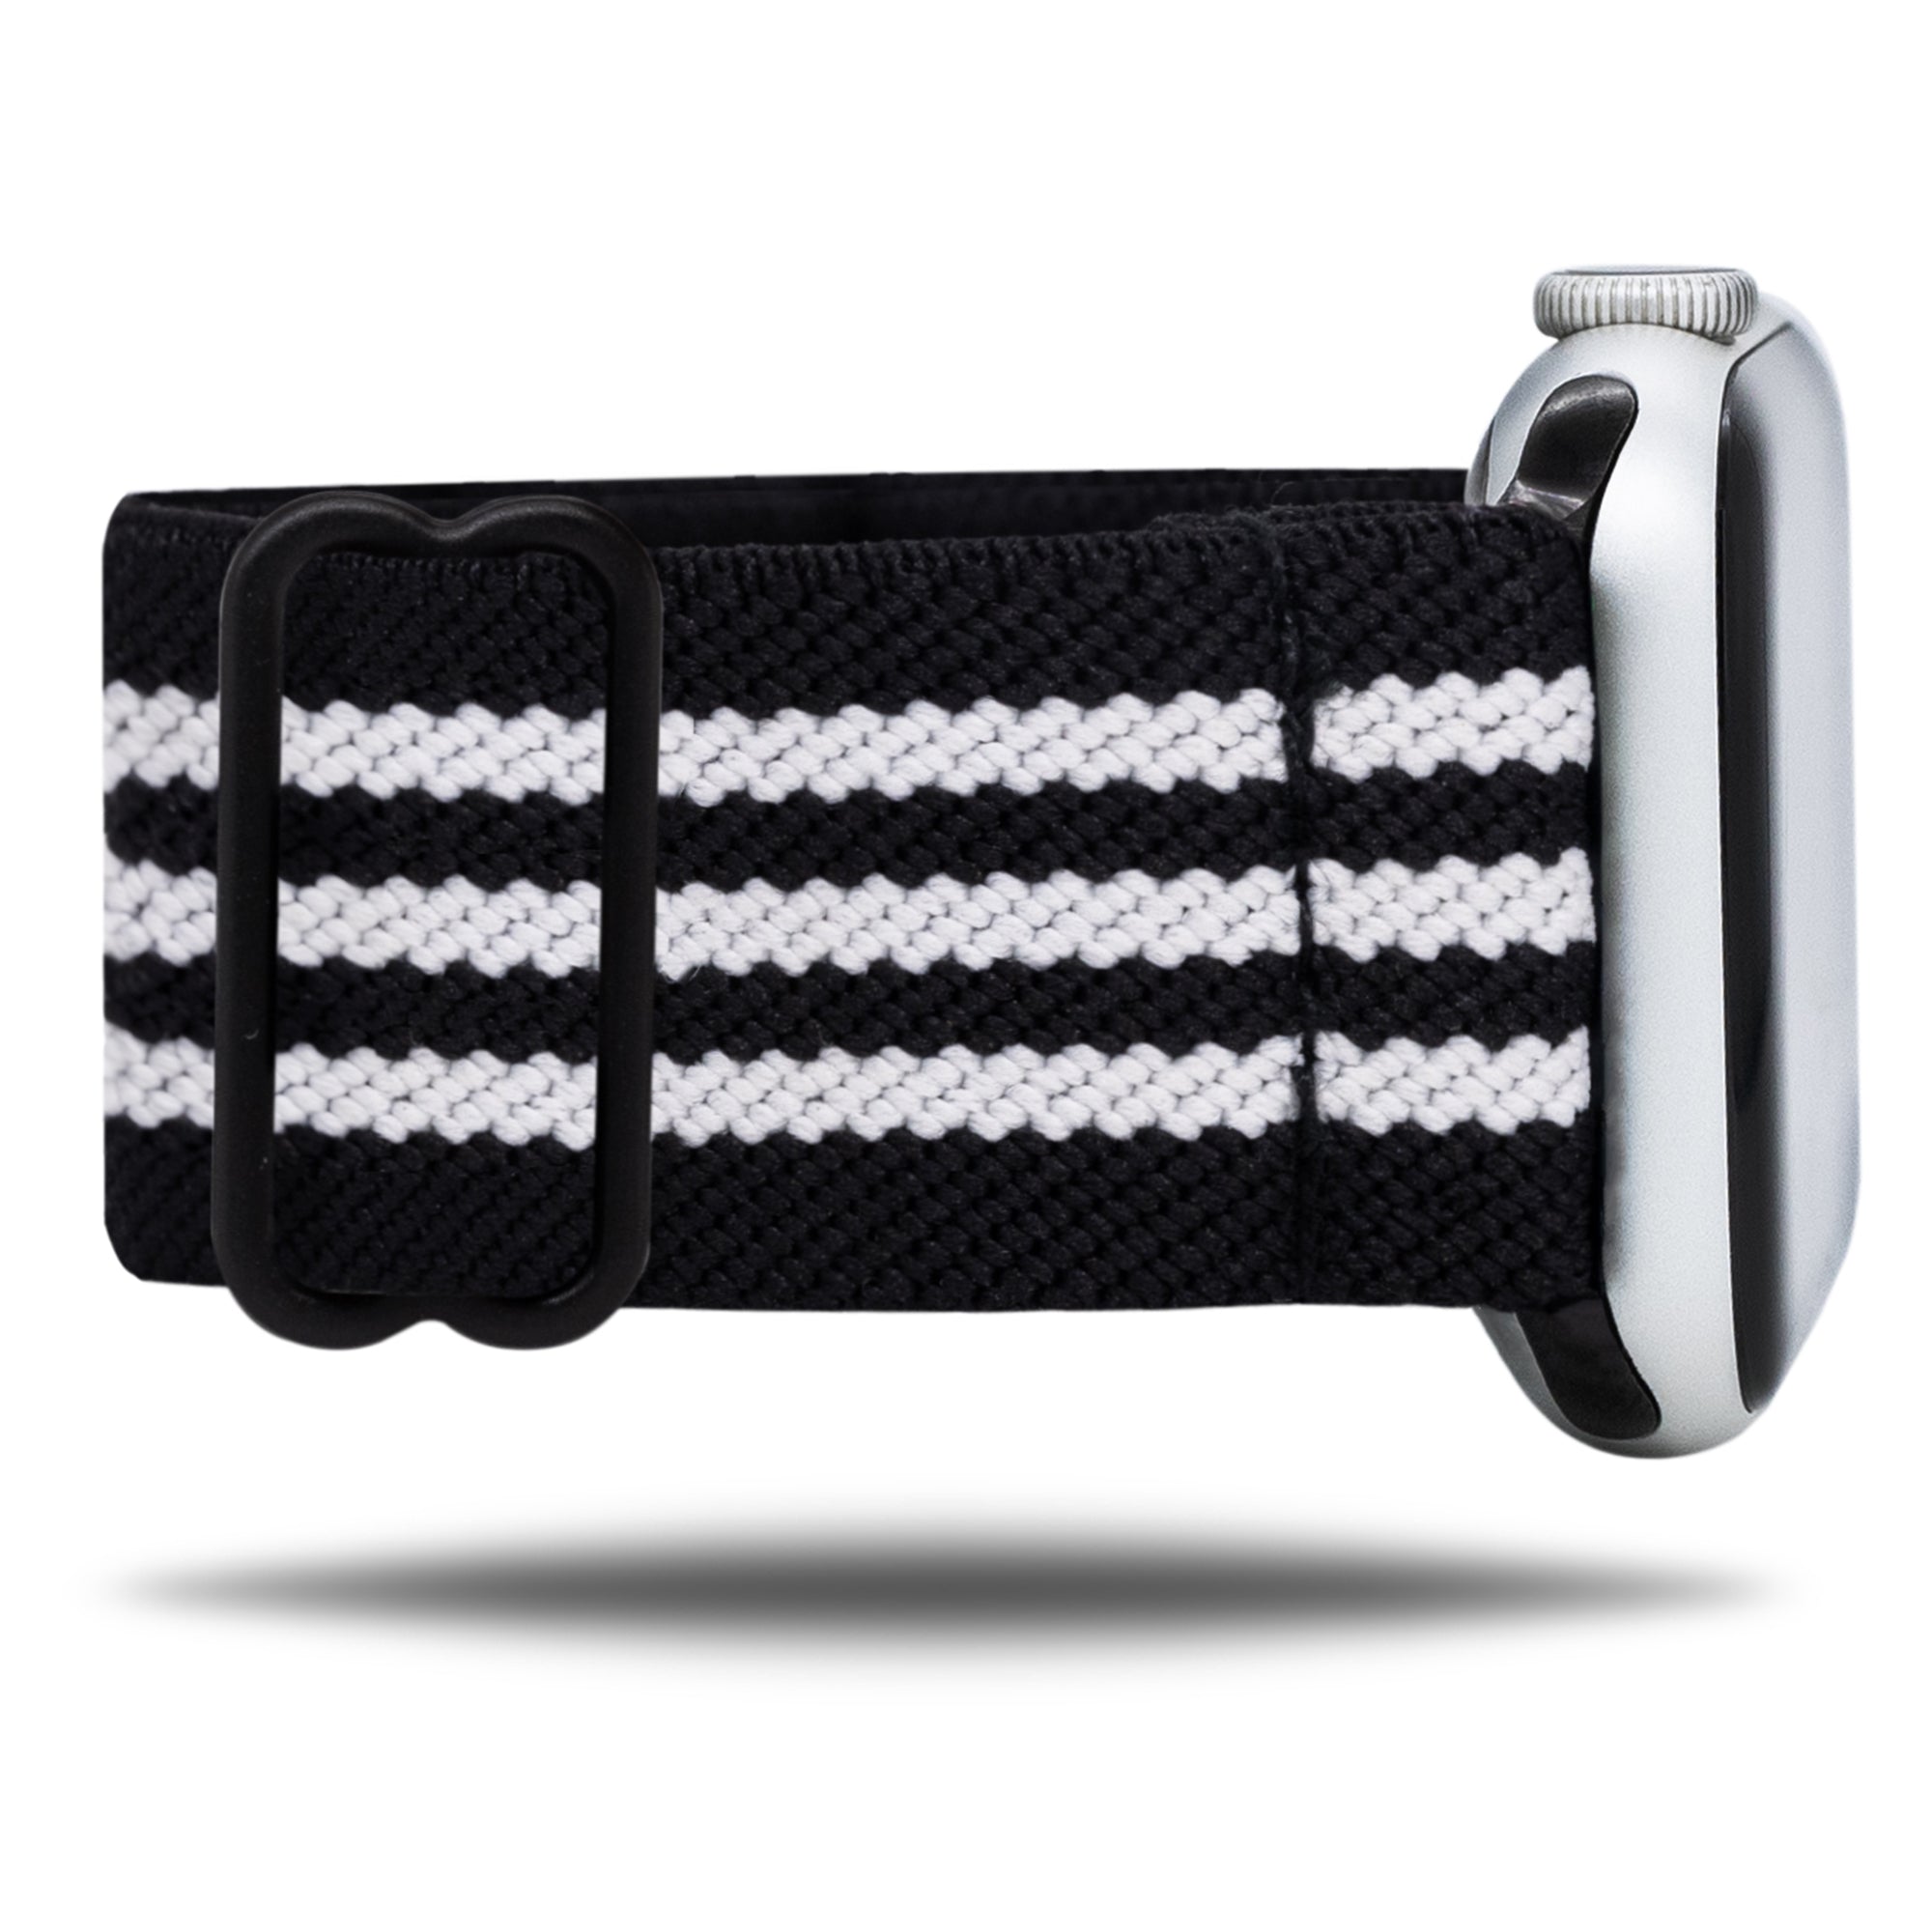 Carbon Fiber Apple Watch Bands (Black, 41mm / 40mm / 38mm) by Epic Watch Bands